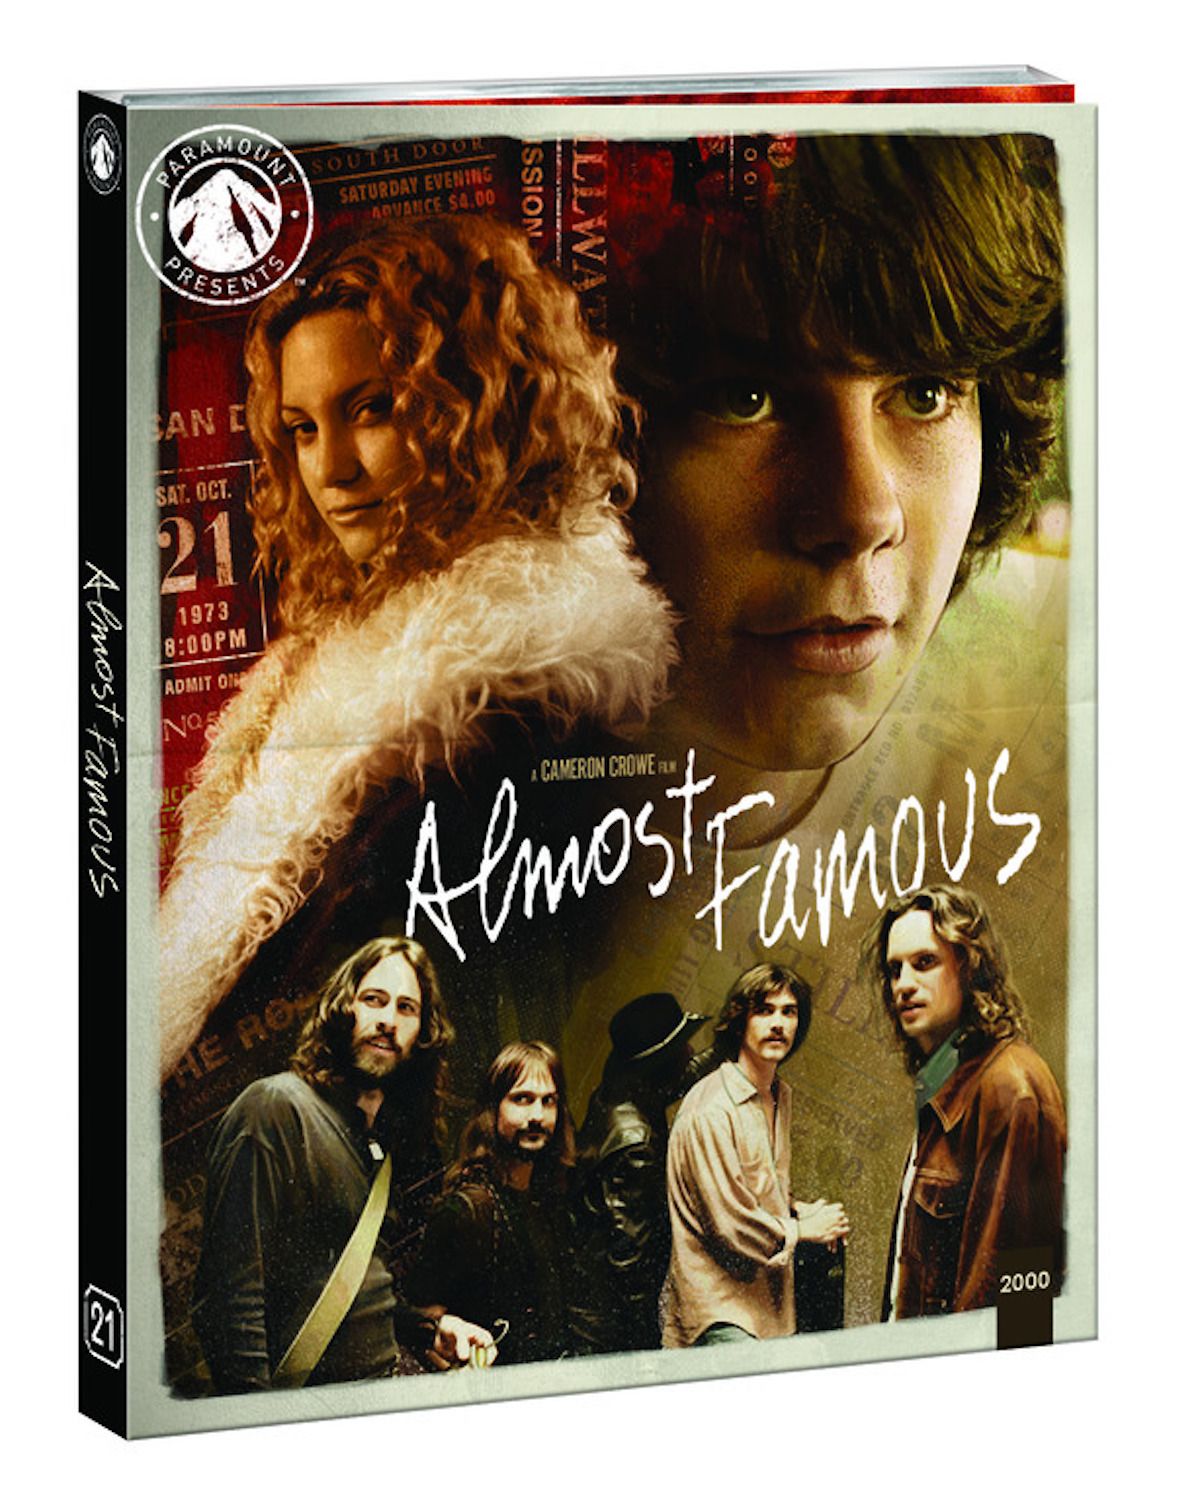 almost-famous-4k-bluray-cover